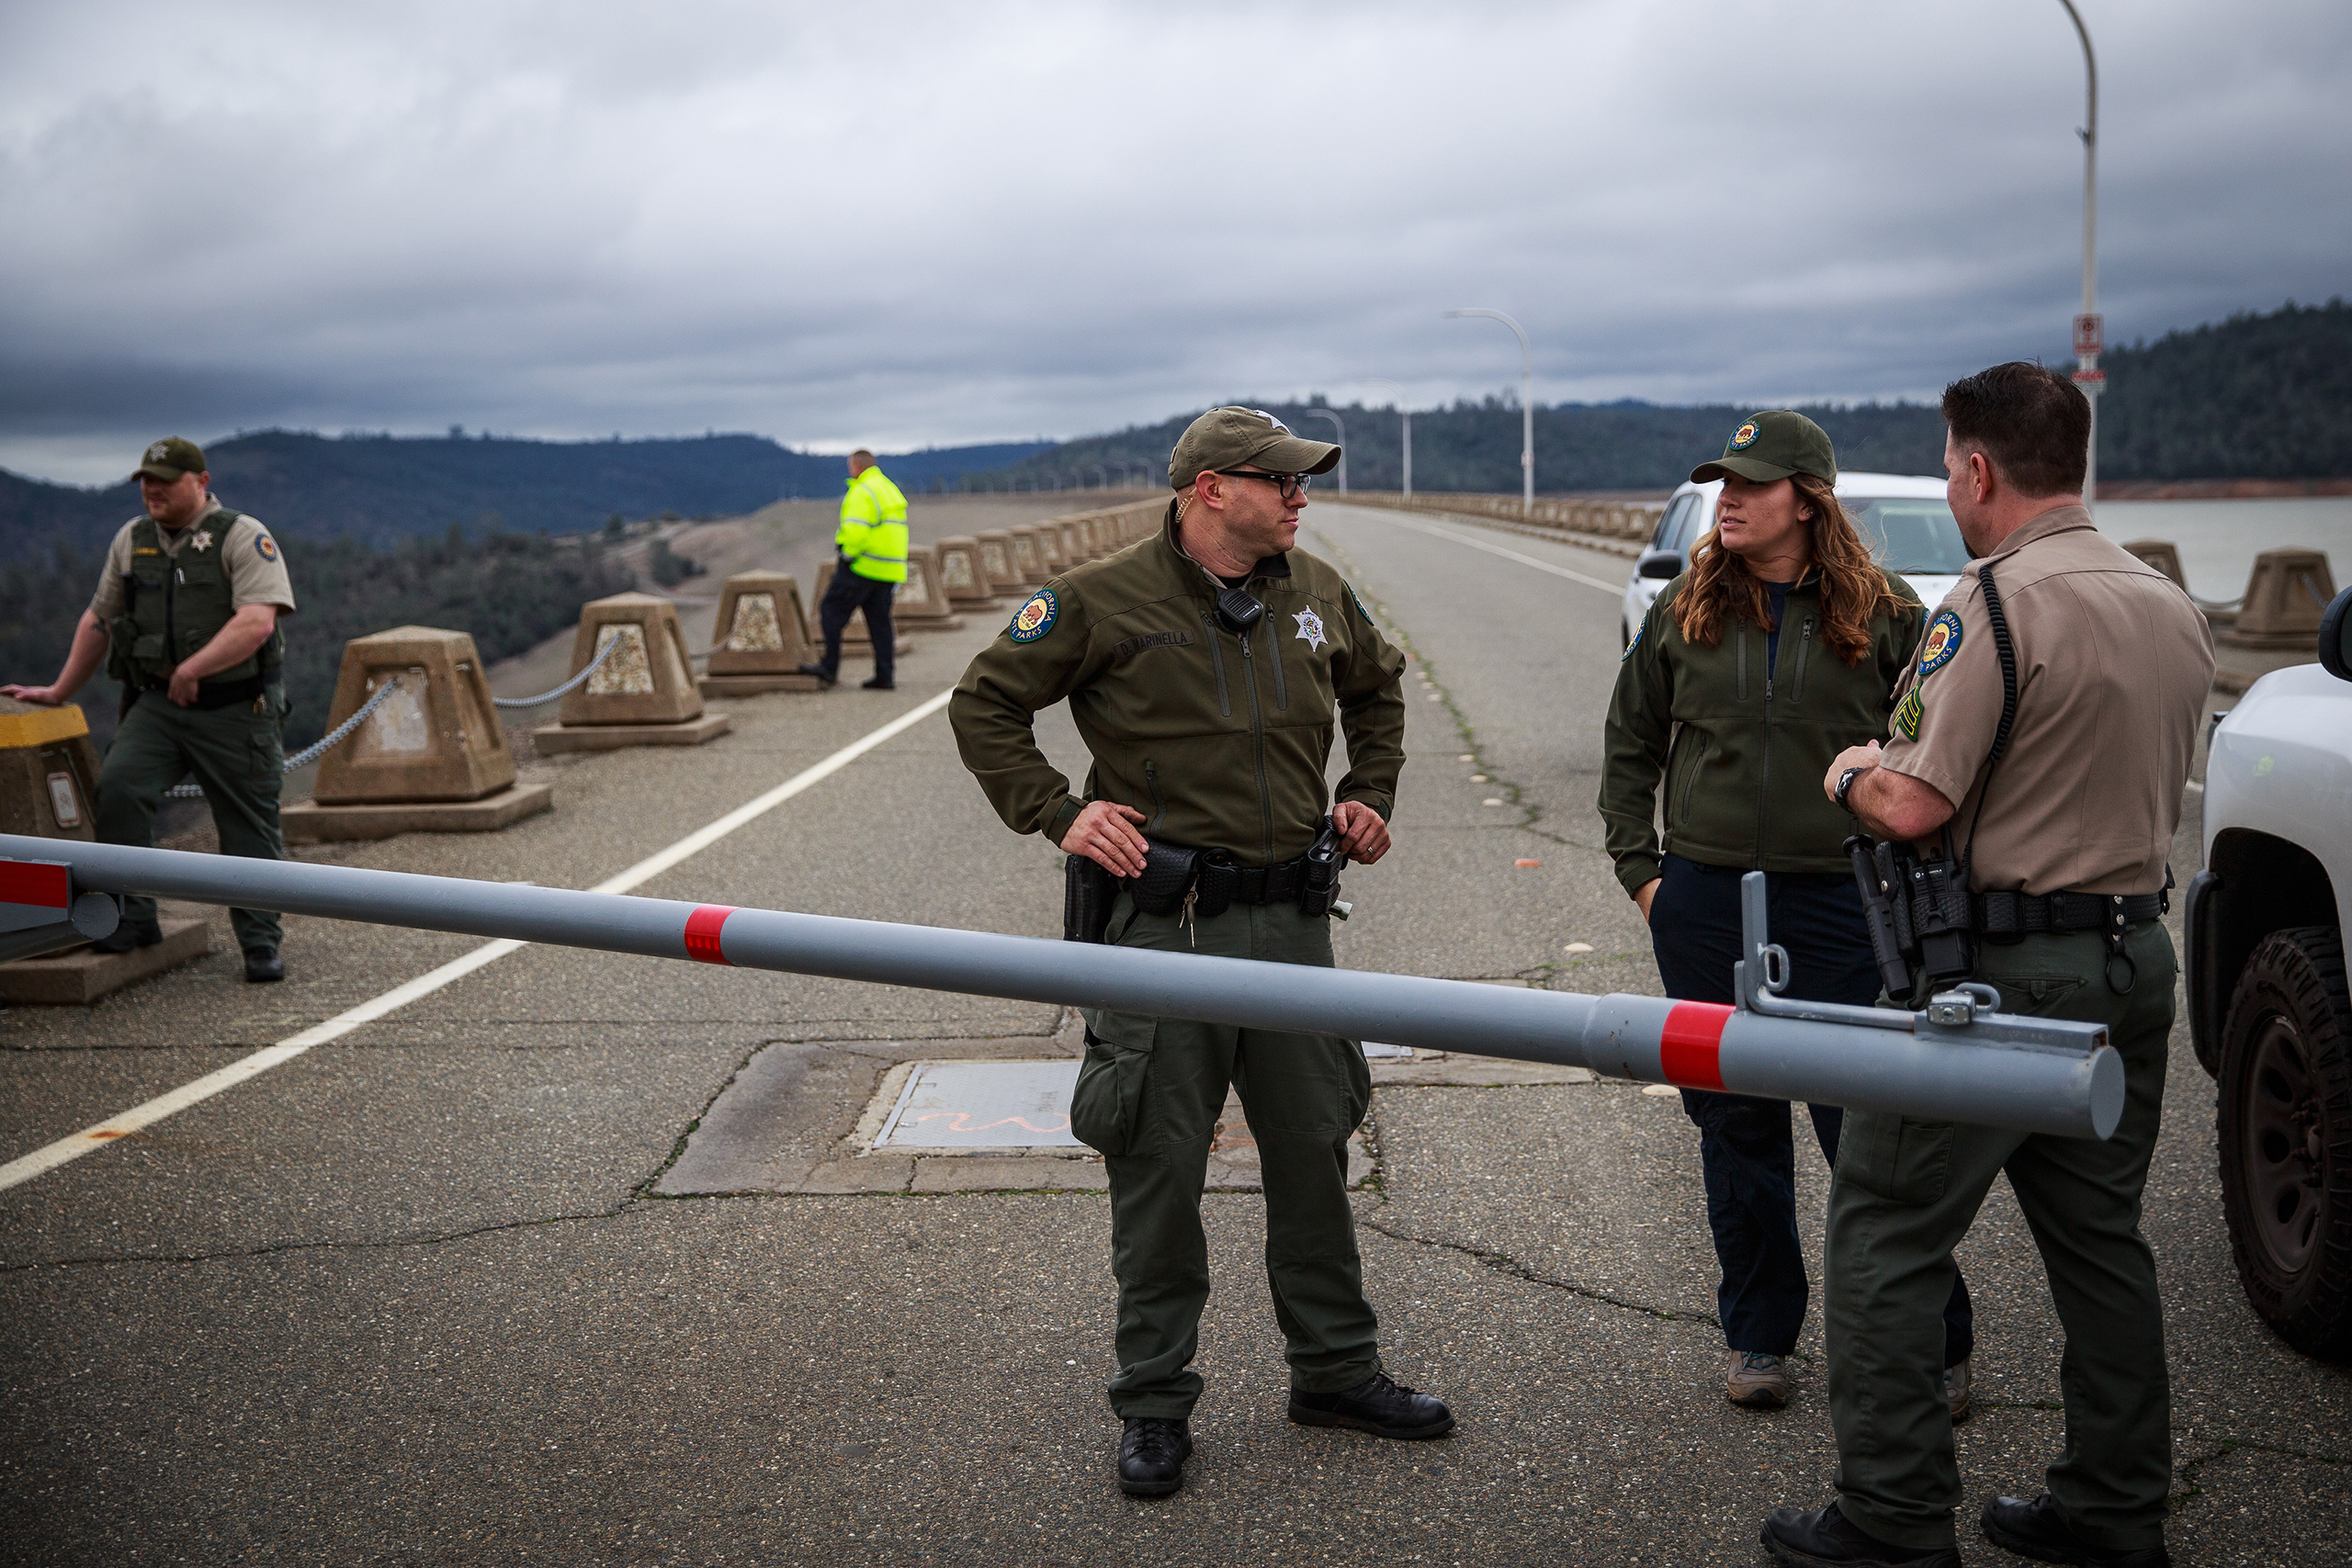 California State Park Rangers close the top of Oroville Dam after a hole was torn in the spillway while releasing water in advance of more rain on Feb. 7, 2017 in Oroville, Calif.